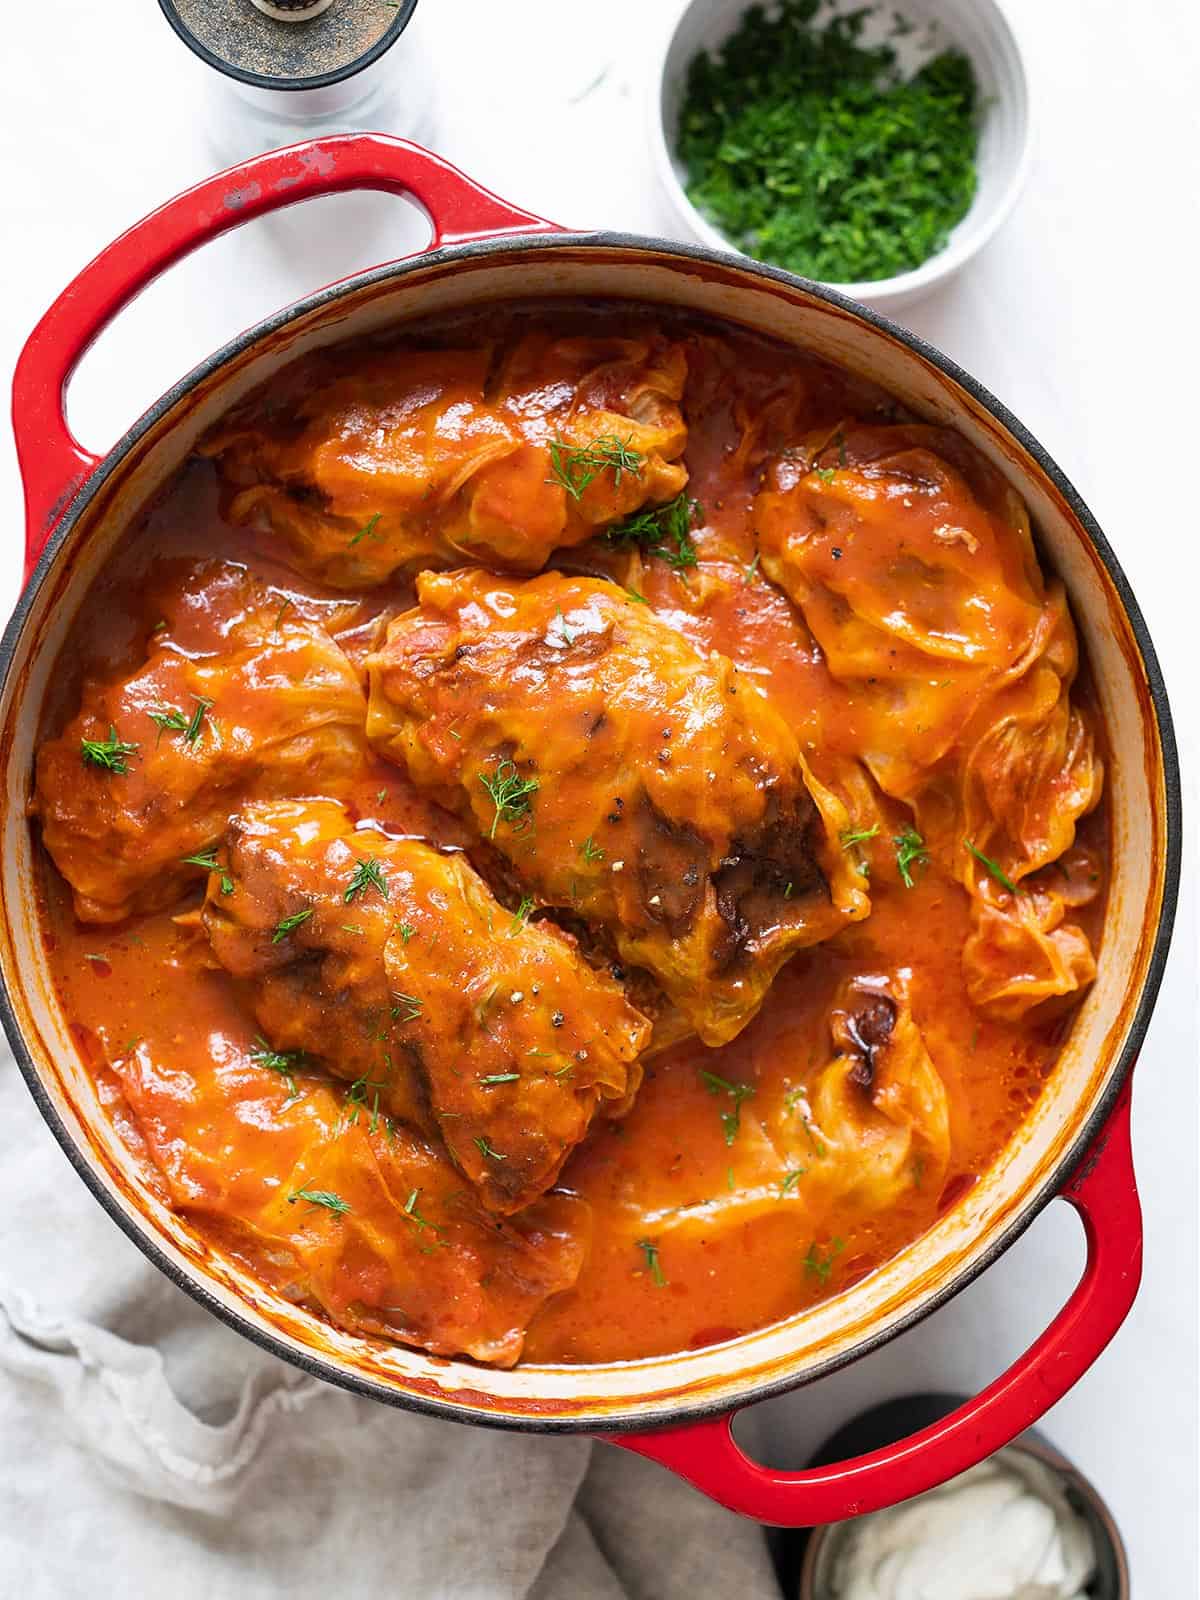 Cabbage rolls in a large stock pot covered with tomato sauce and garnished with fresh dill.